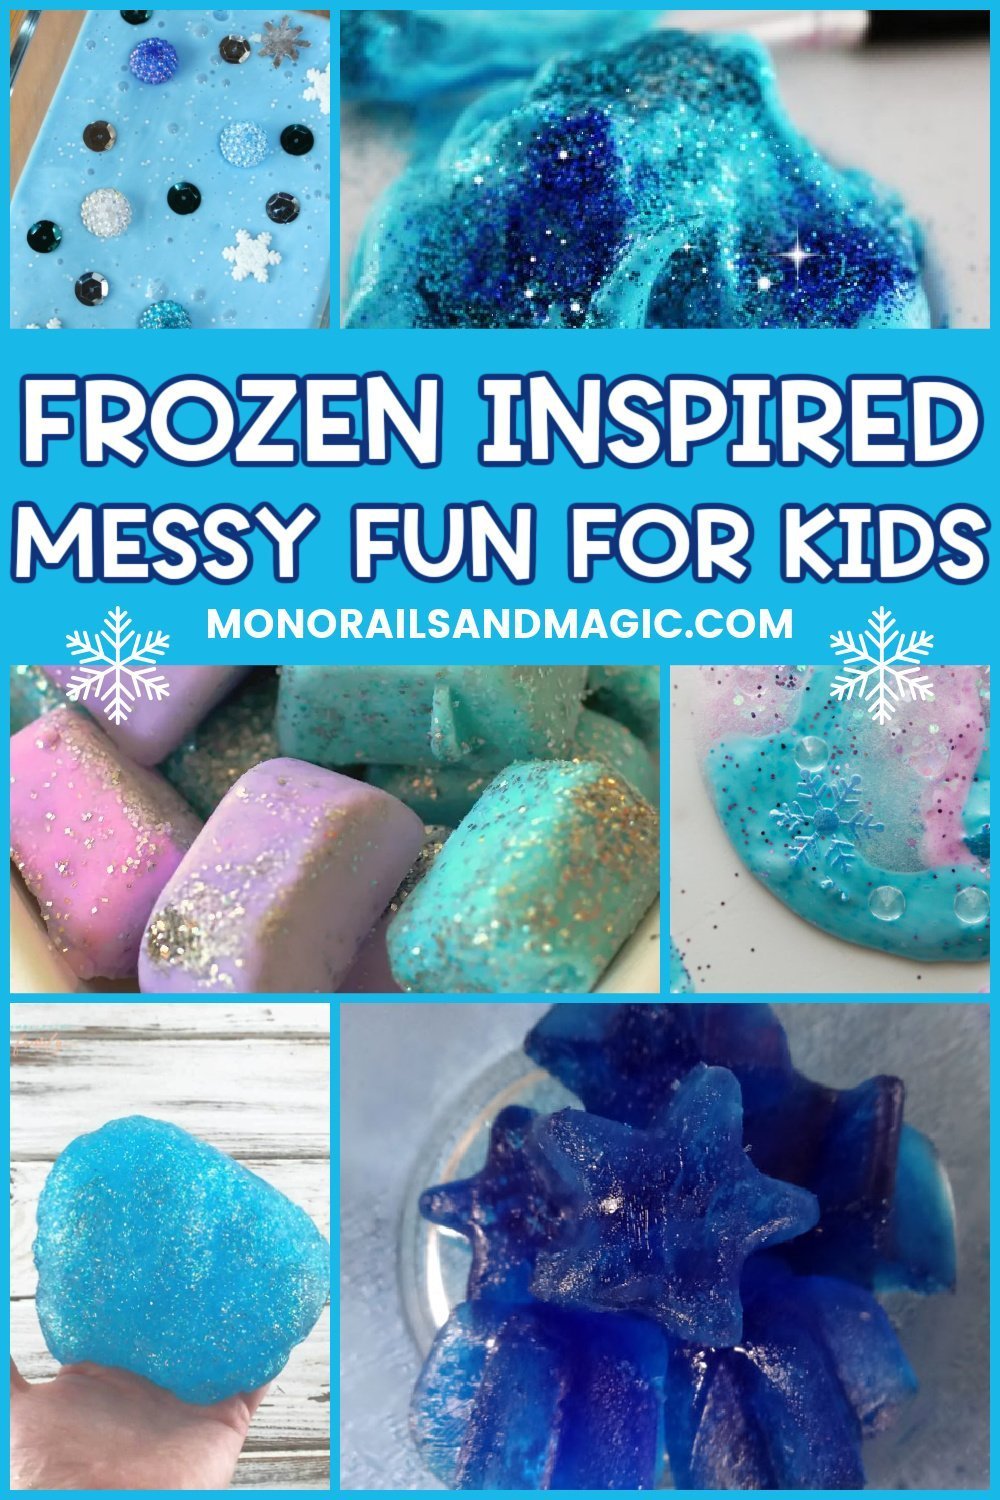 Messy activities for kids inspired by Disney's Frozen.